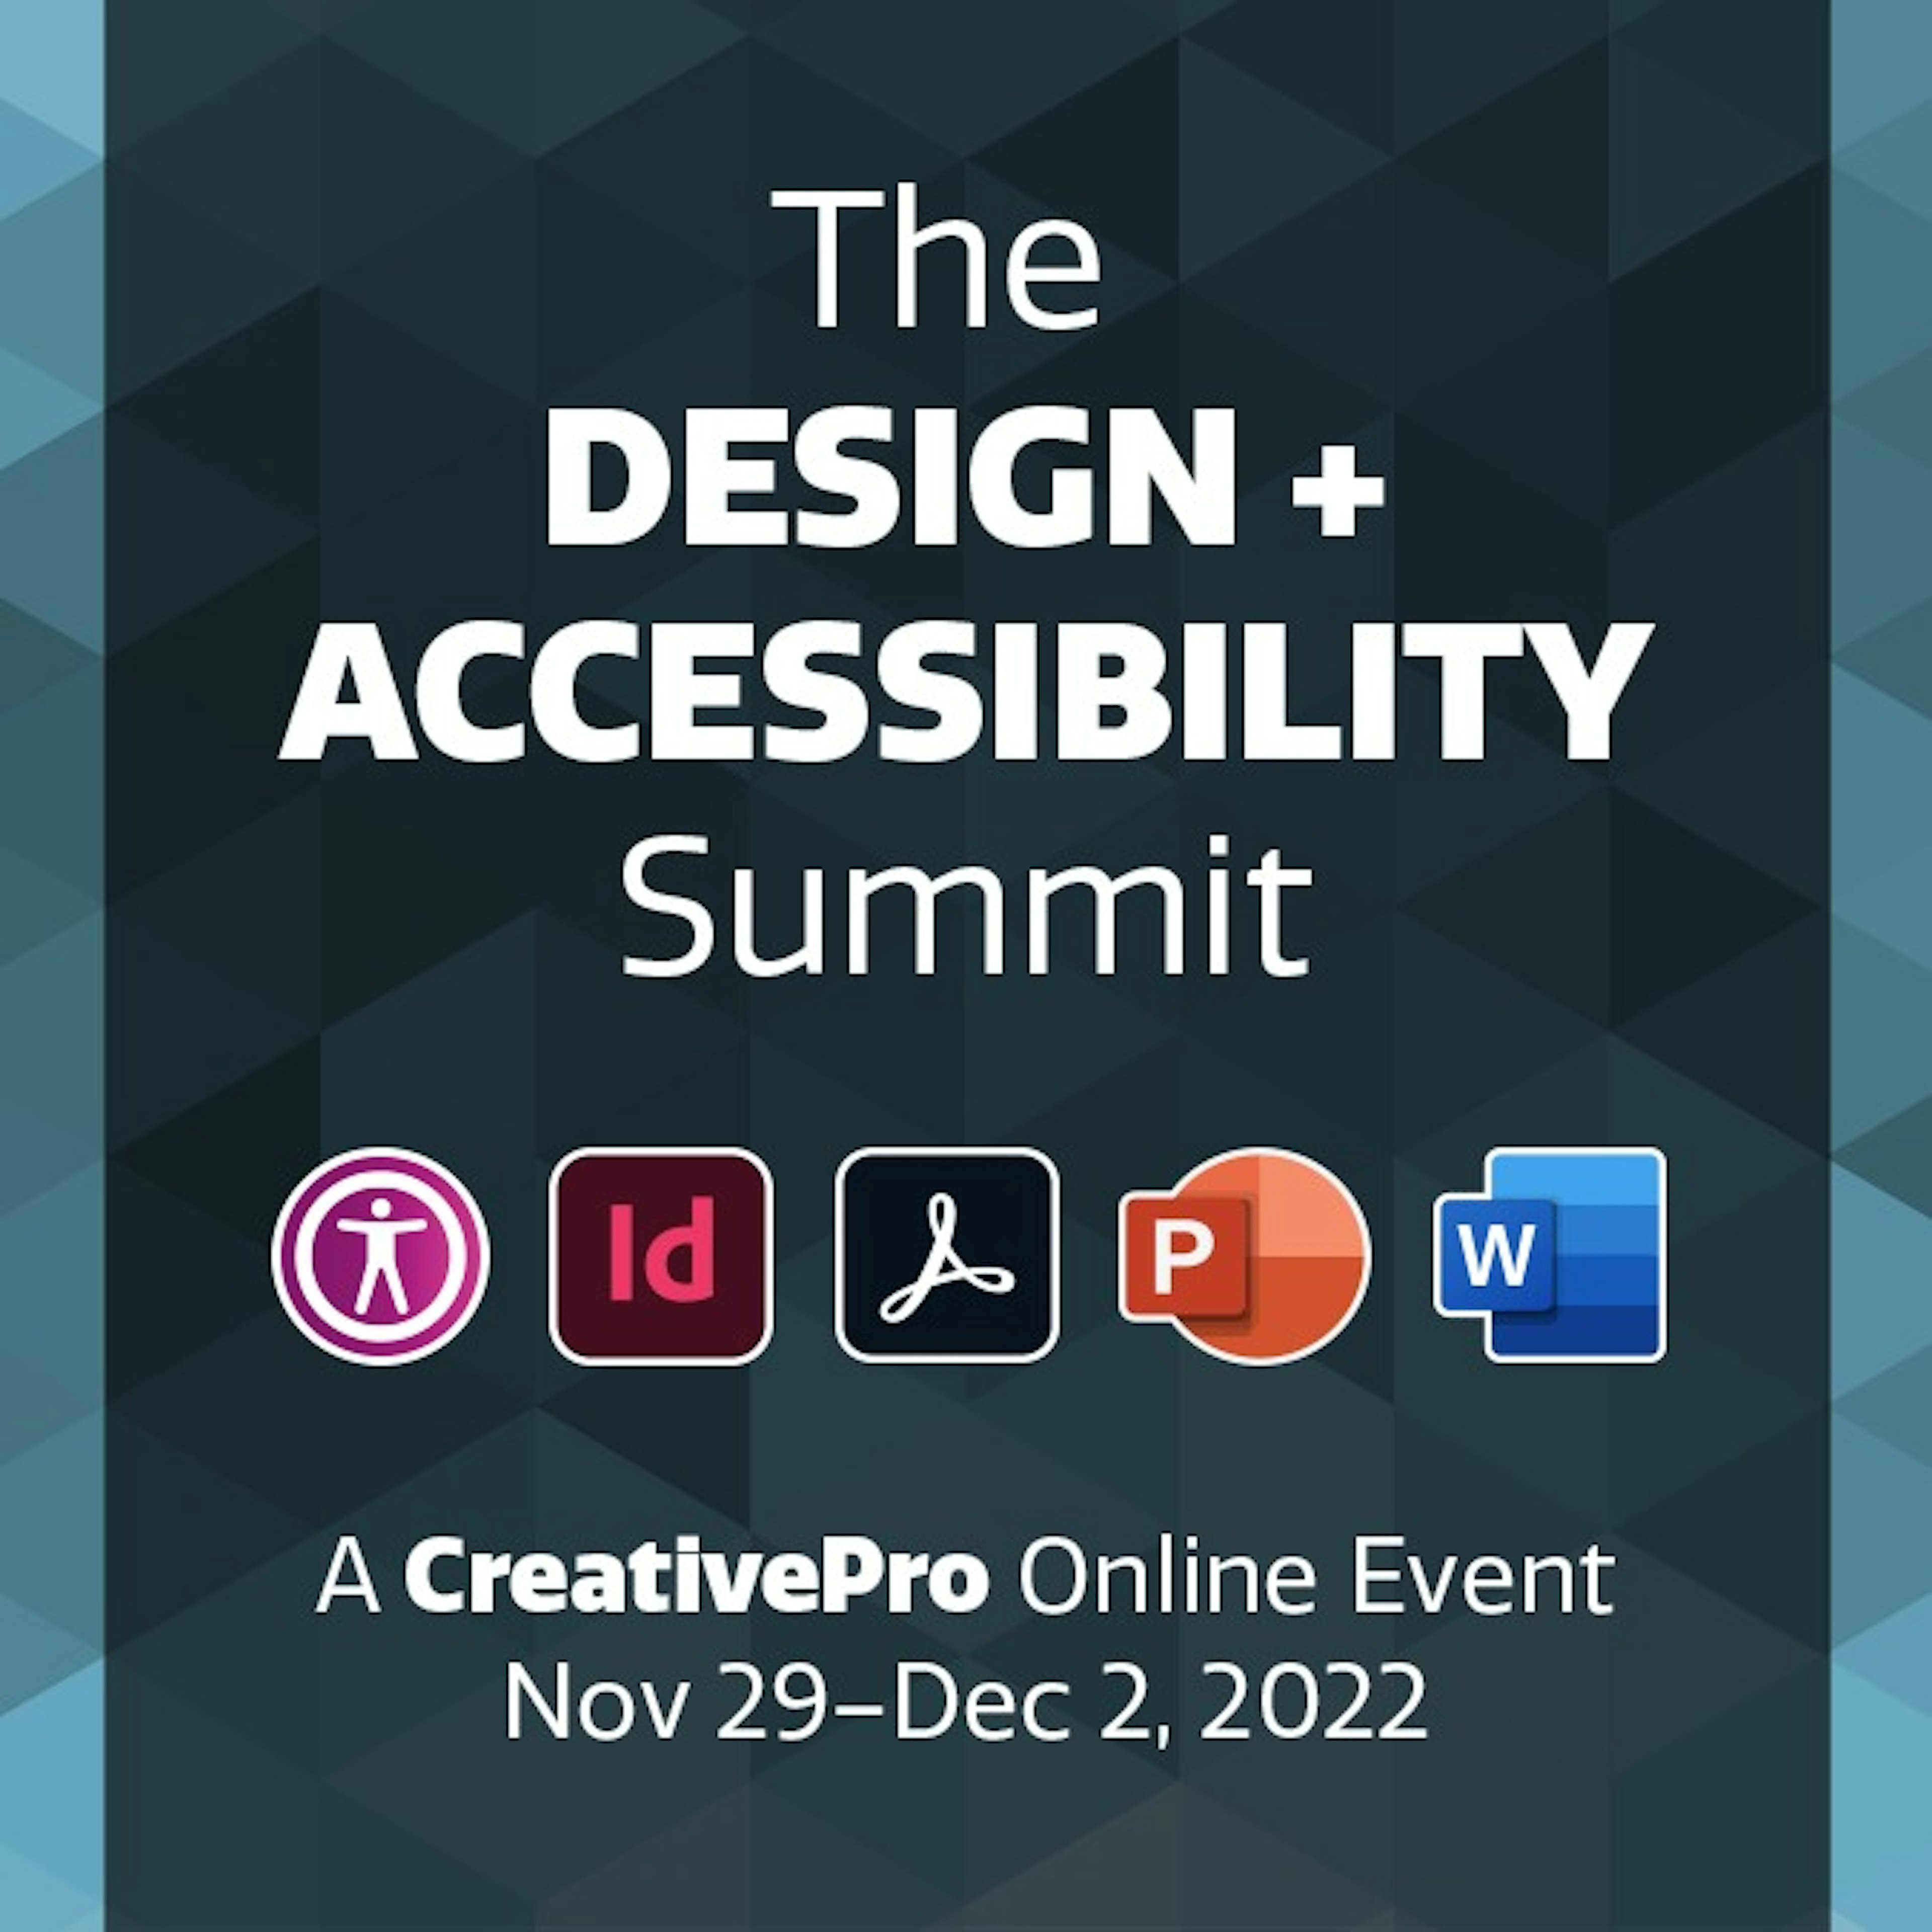 Logo image of The Design + Accessibility Summit